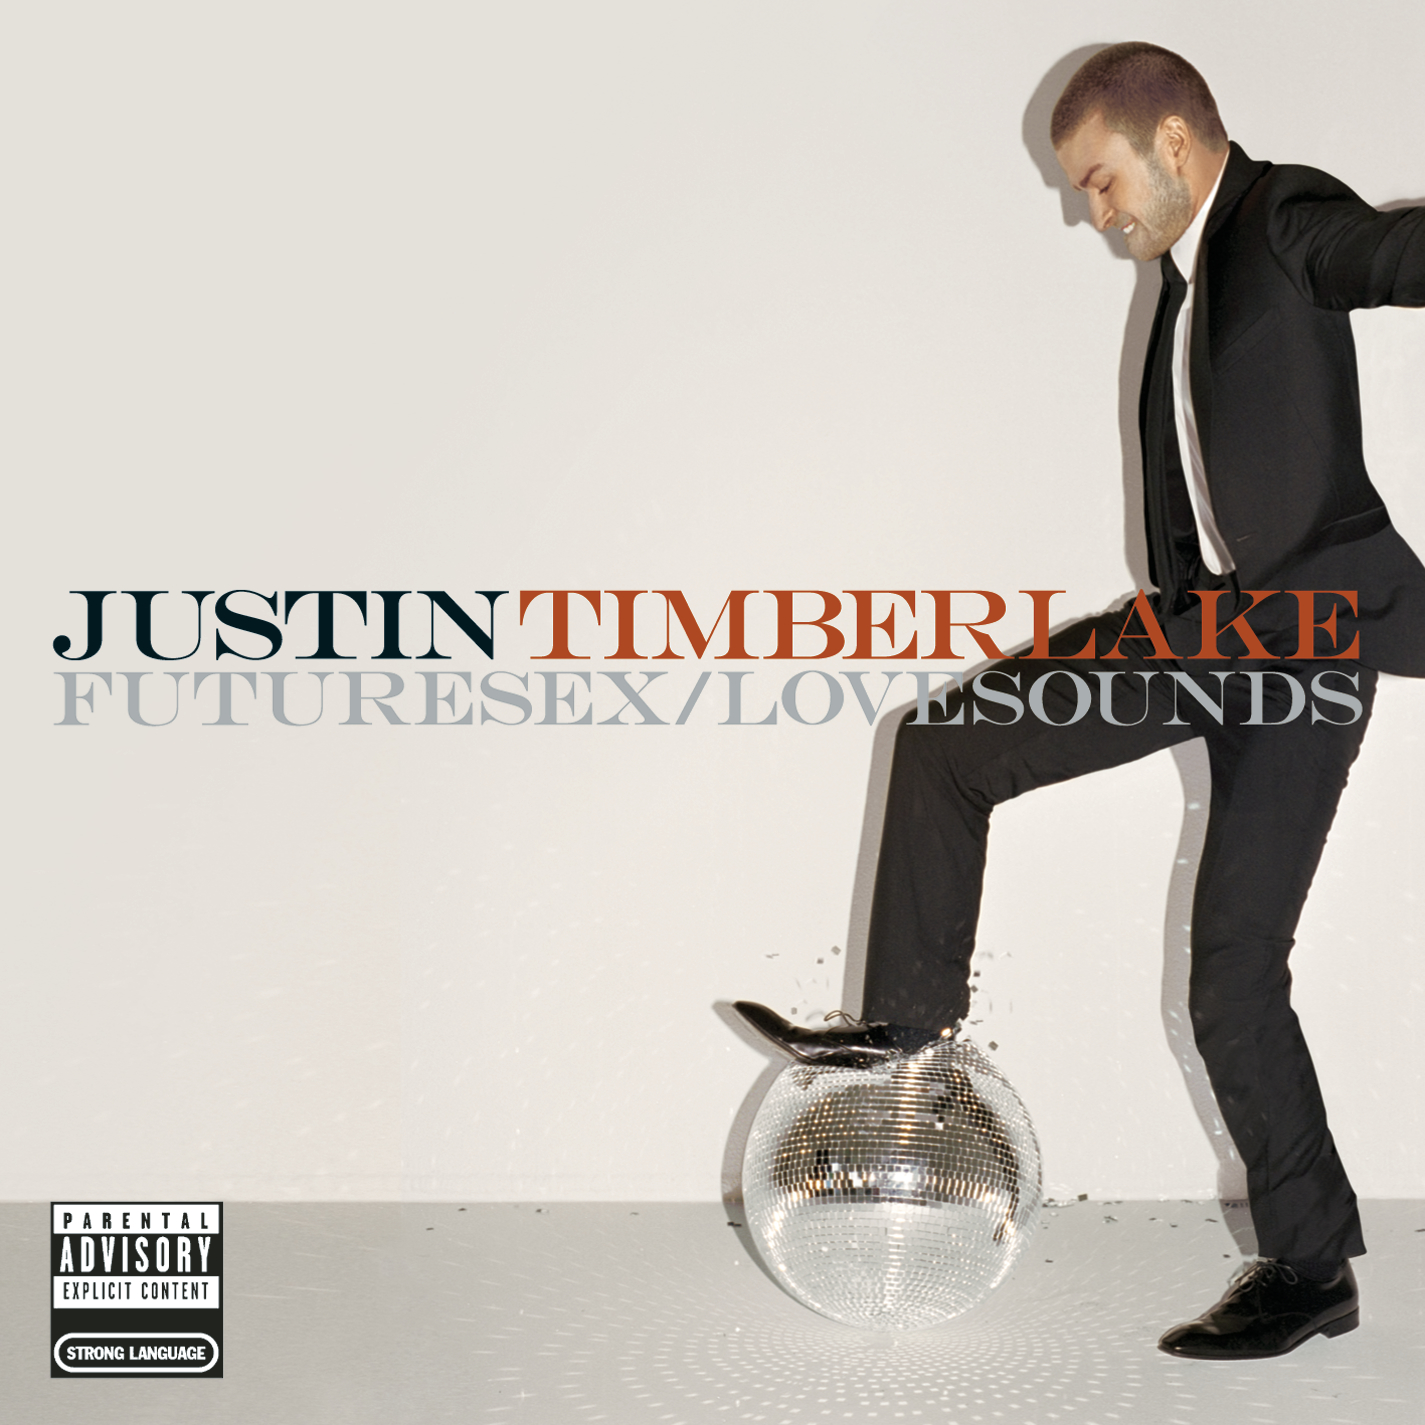 Justin Timberlake - FutureSex / LoveSounds (Album Cover)
Released: Septemeber 8, 2006 
Label: Jive Records
